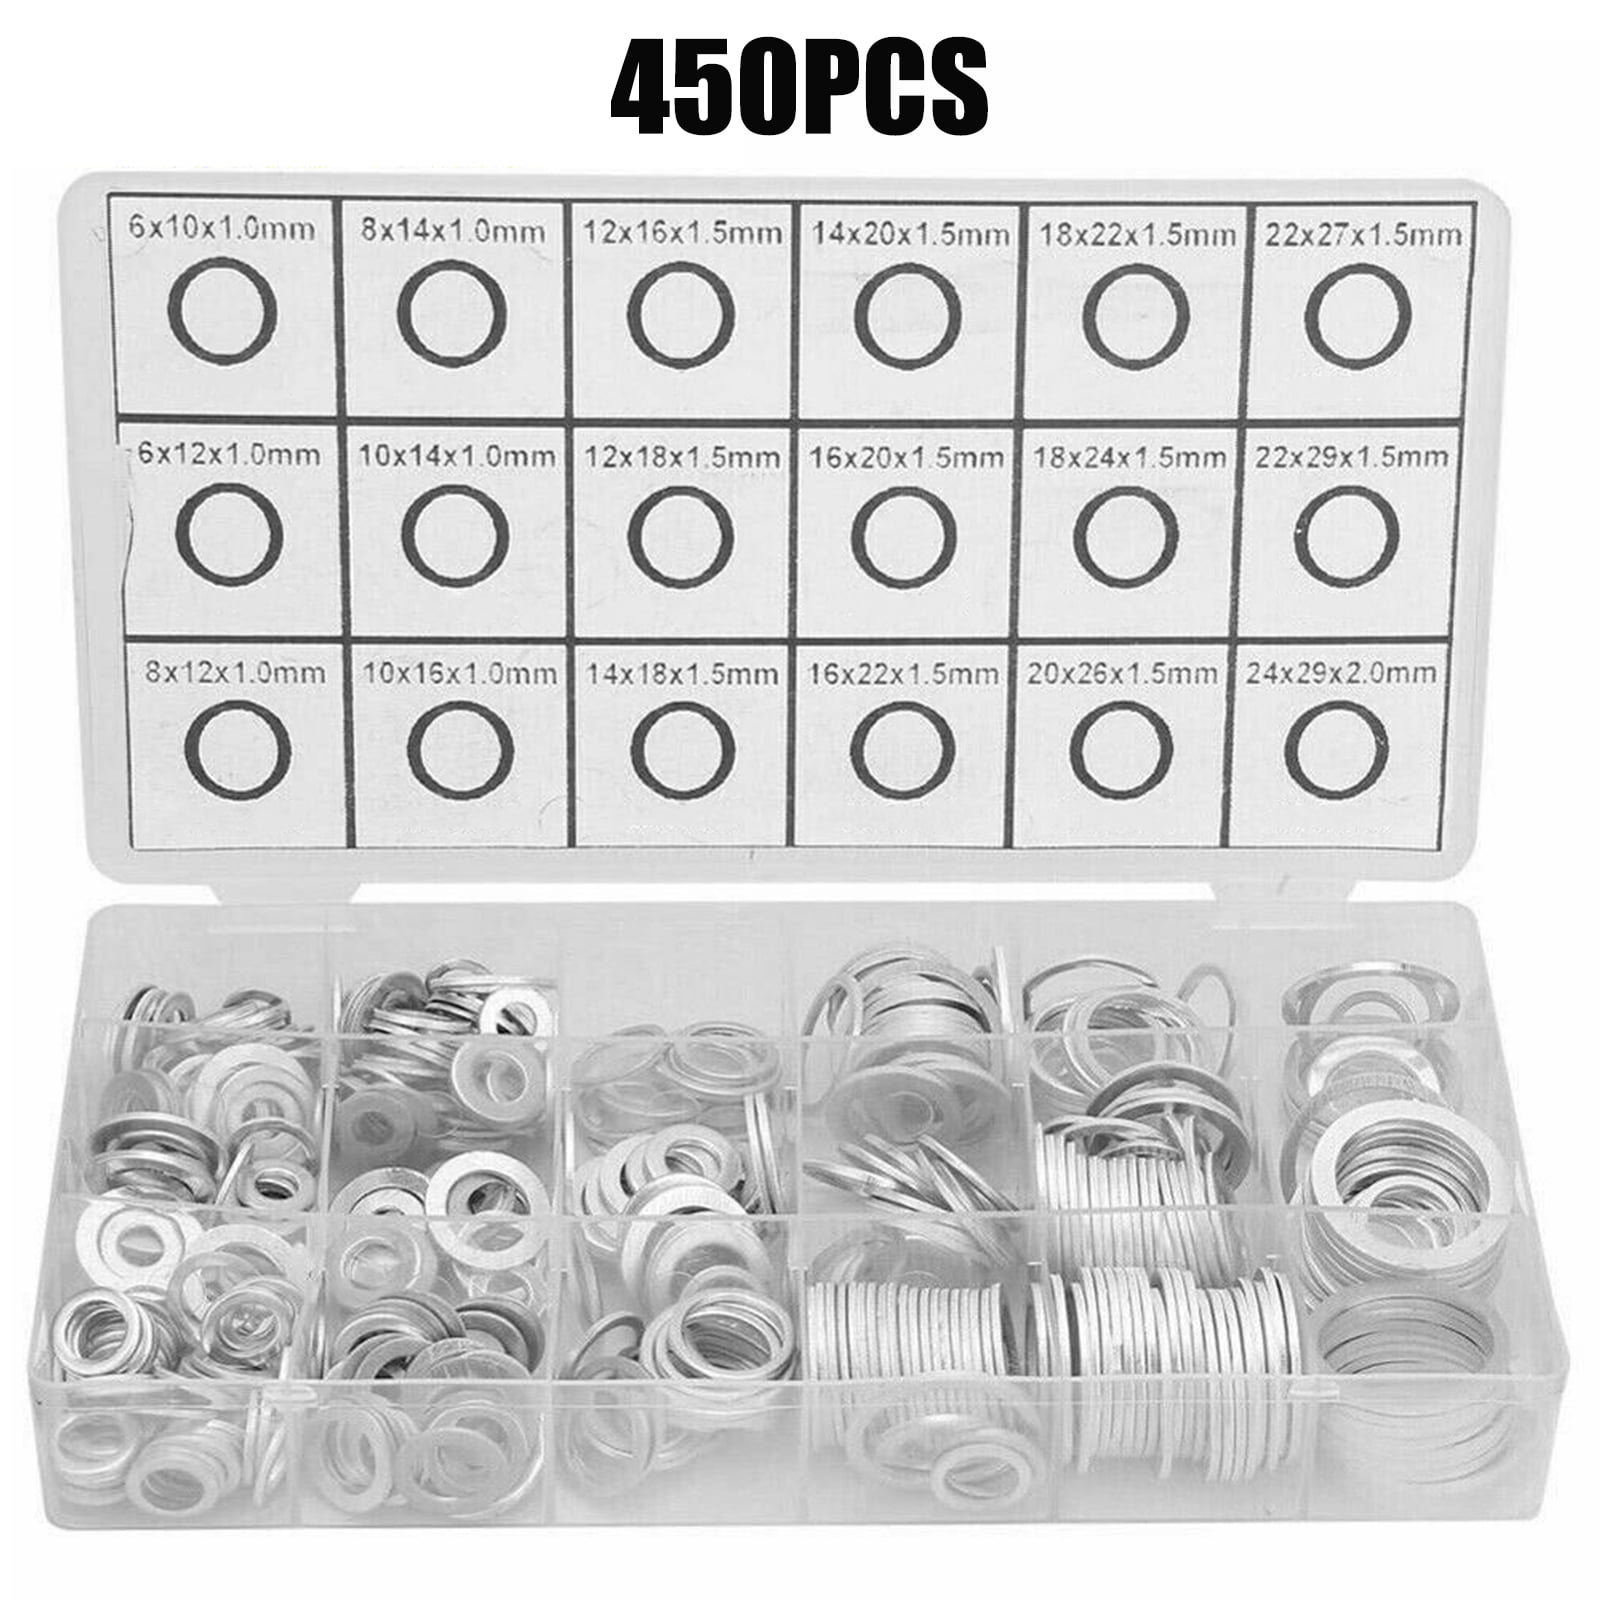 450pcs Aluminum Washer Kit High Temperature Resistant Washers Gasket Seal Washer 